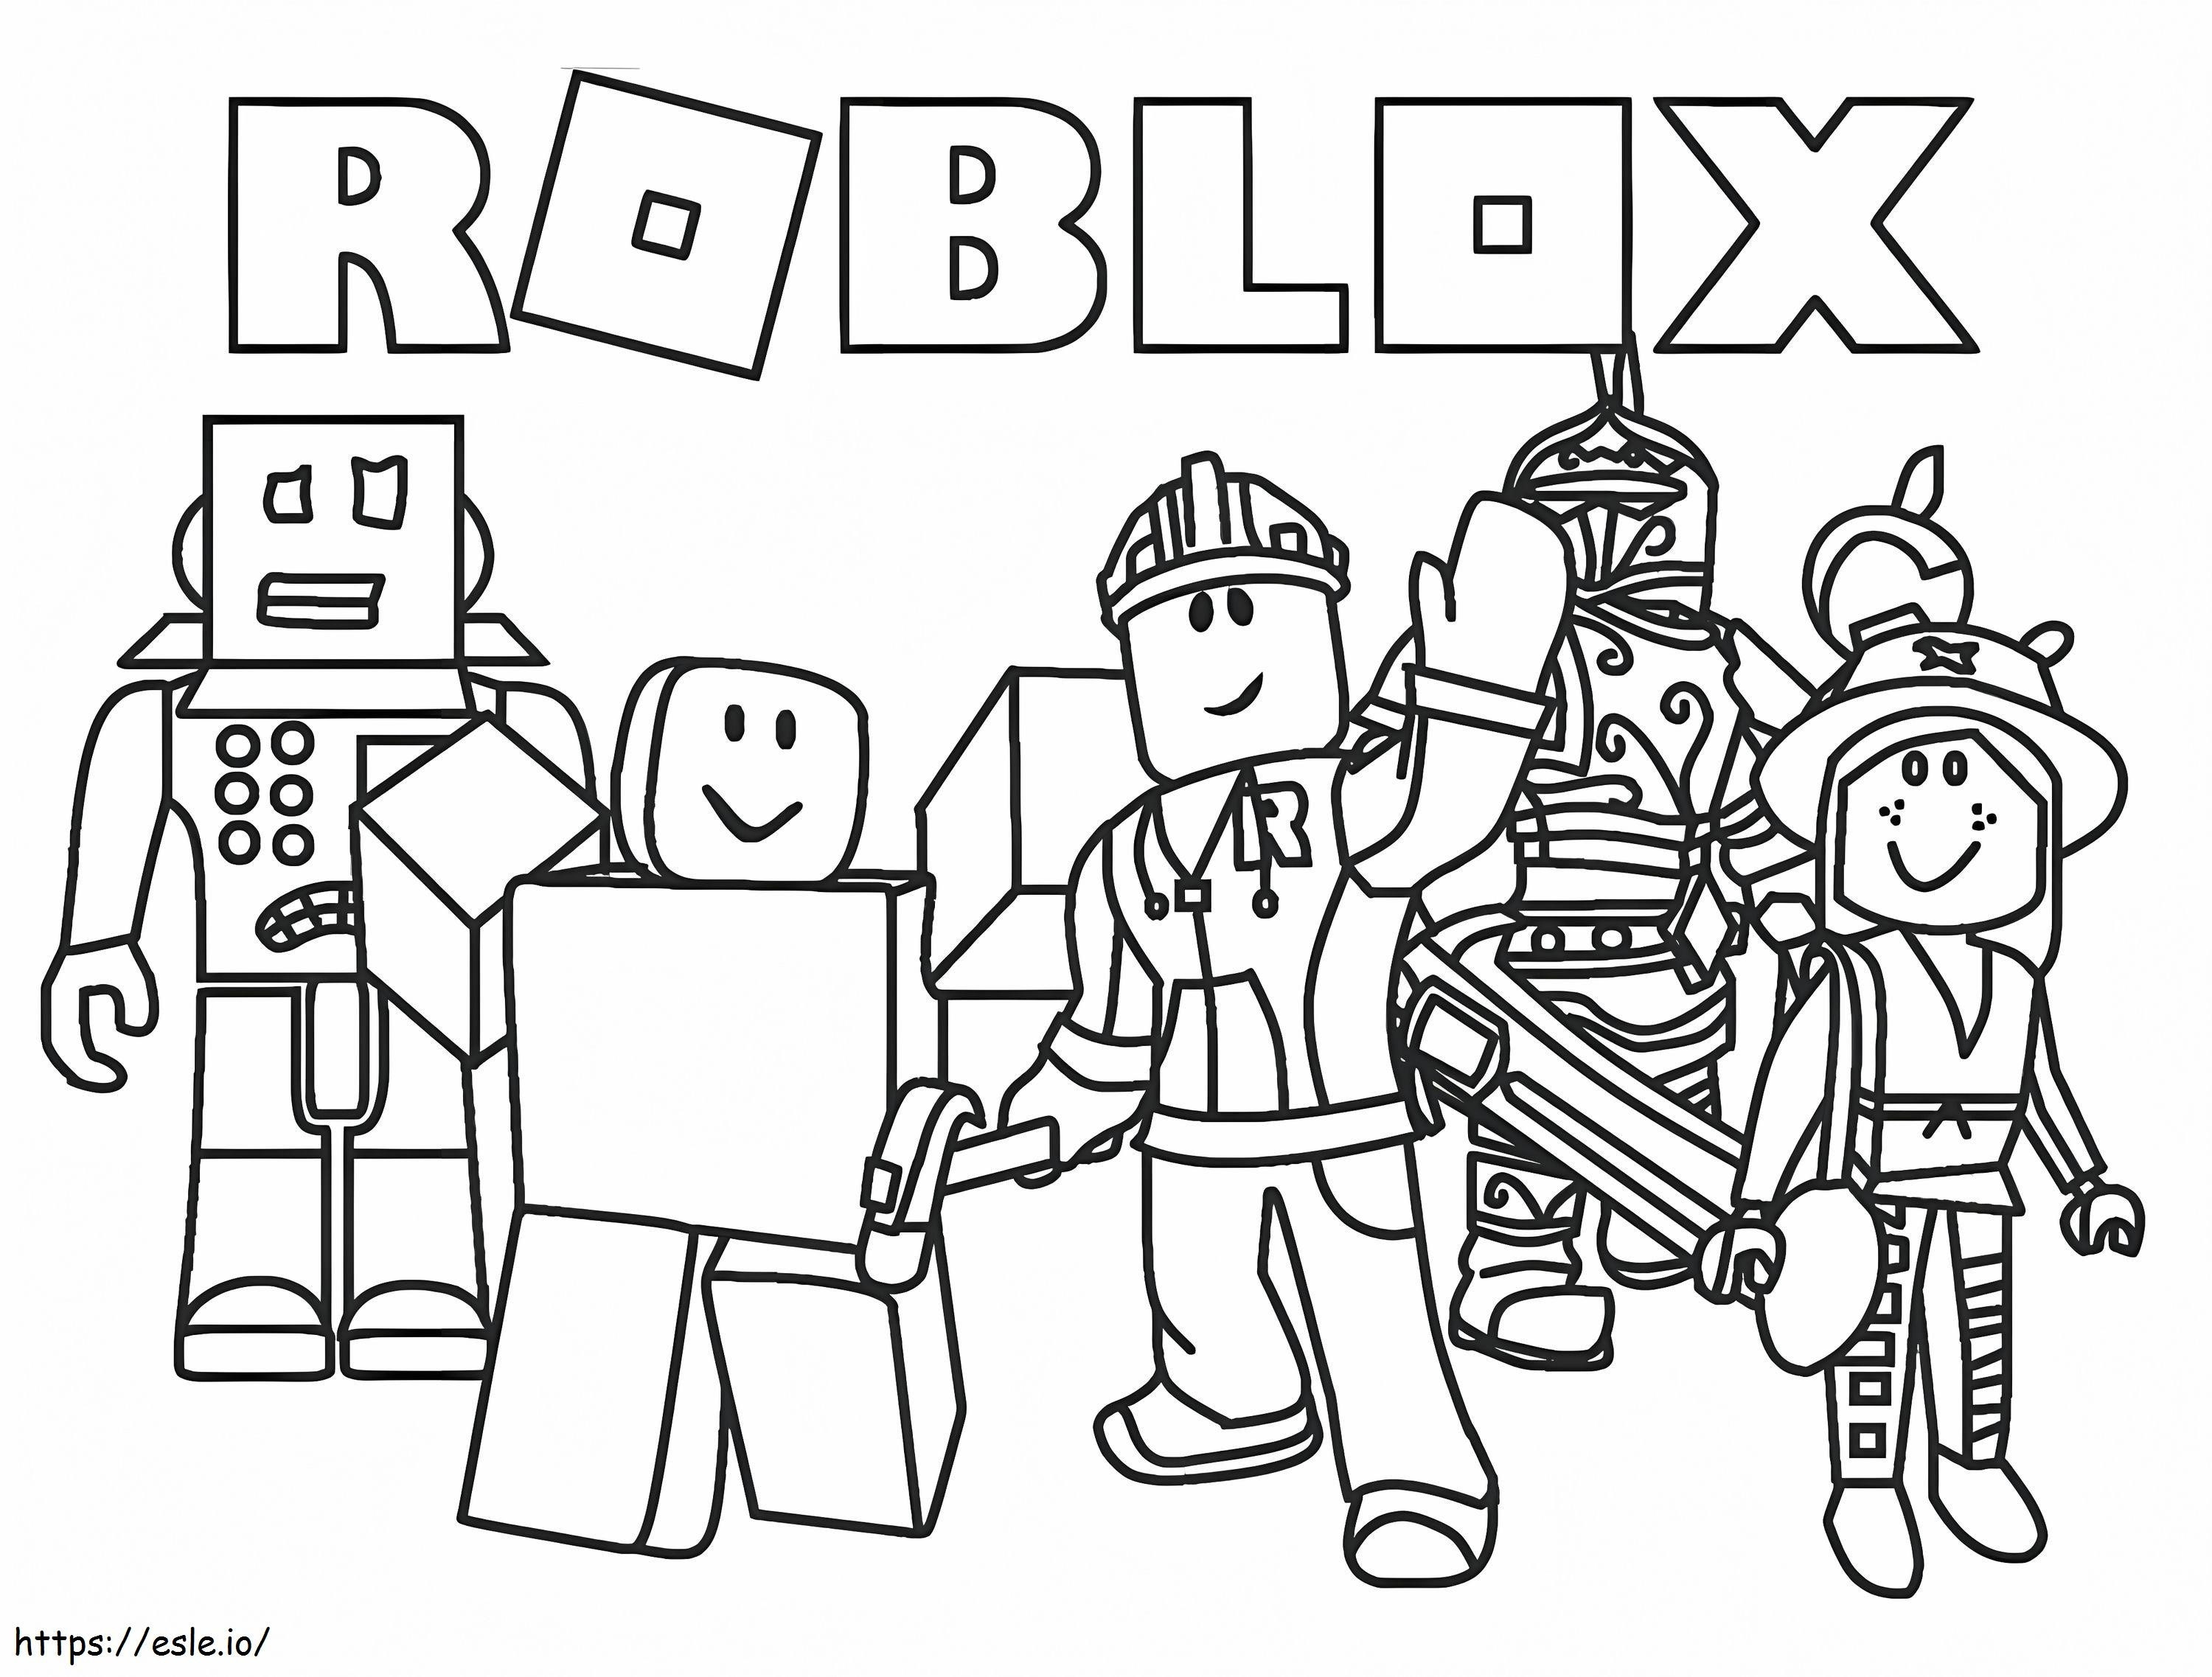 Roblox Characters coloring page